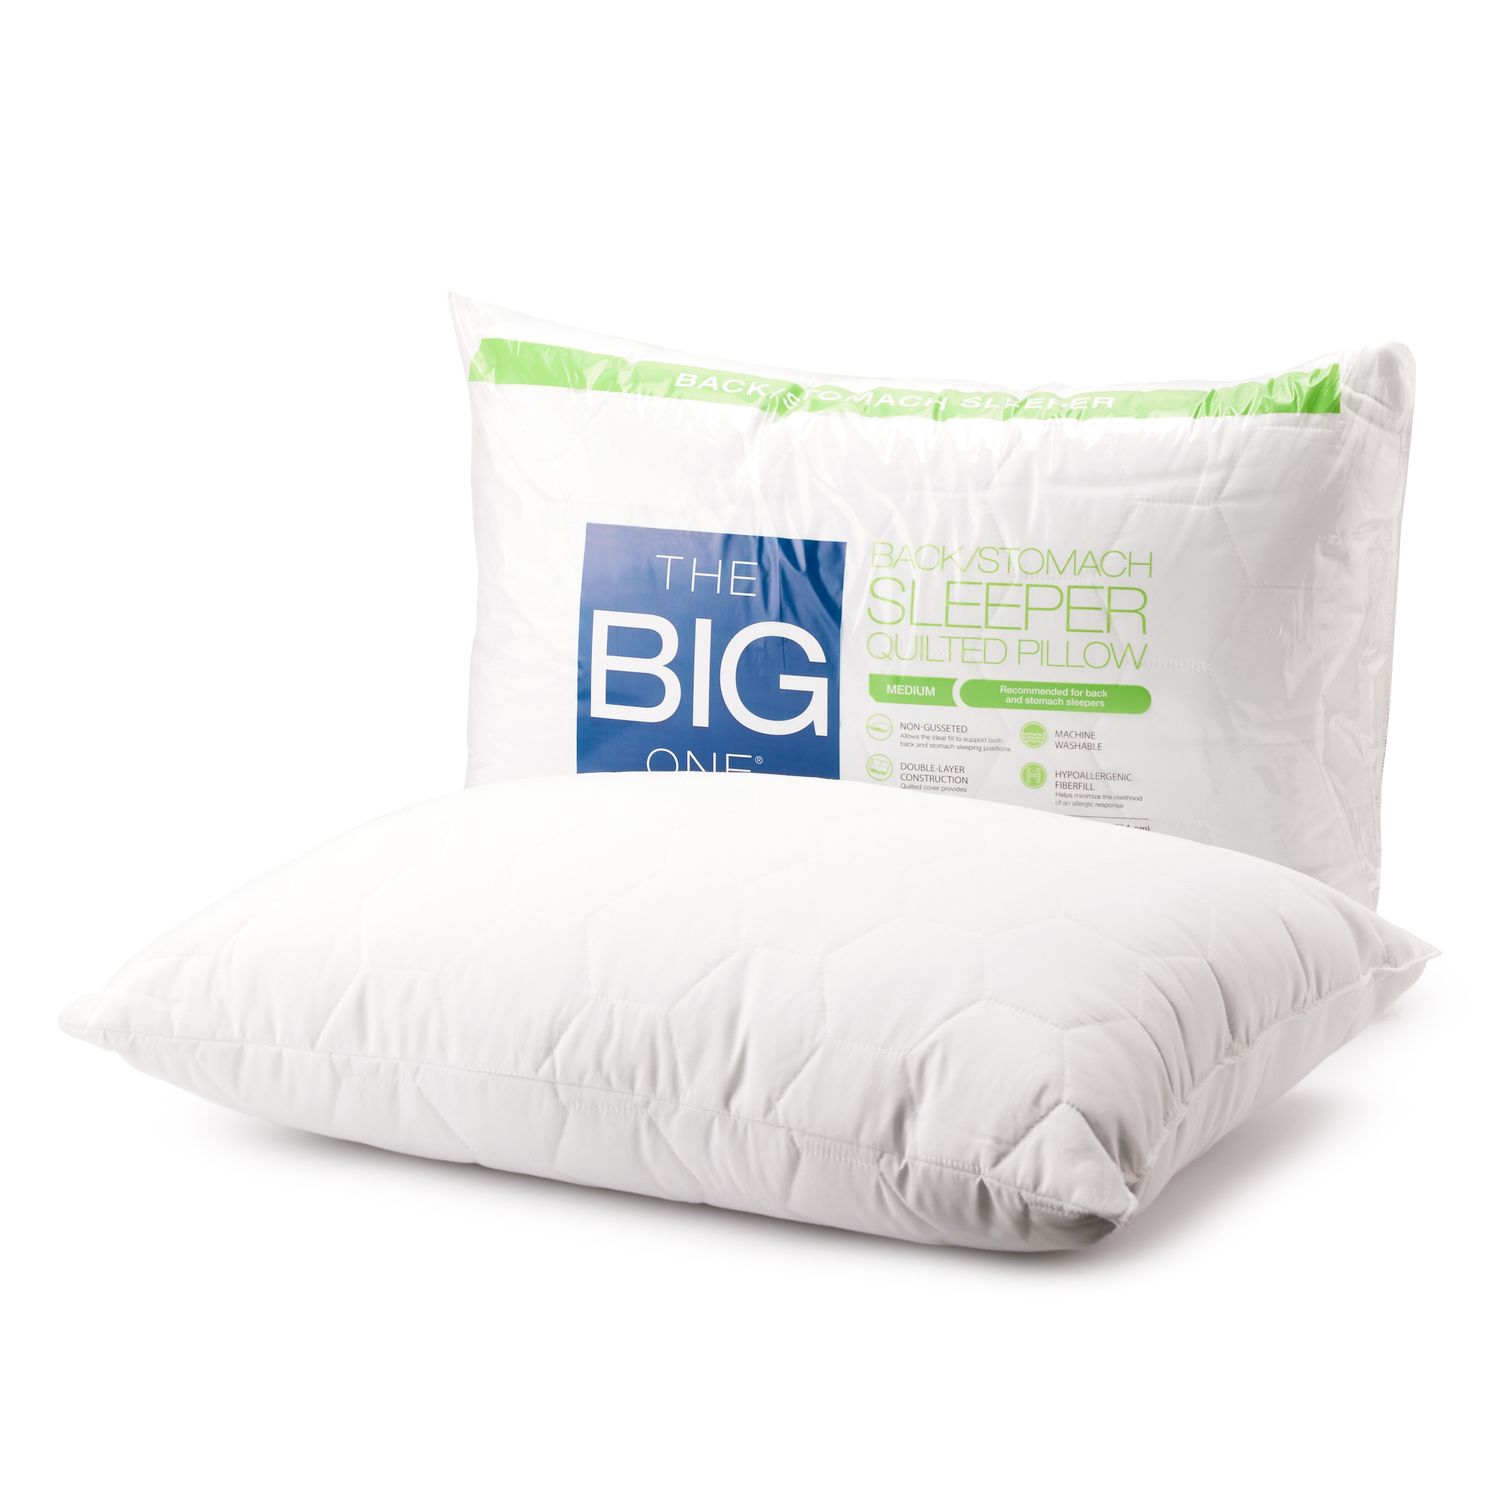 Stomach Sleepers, You're Trippin' If You Don't Have One of These Pillows